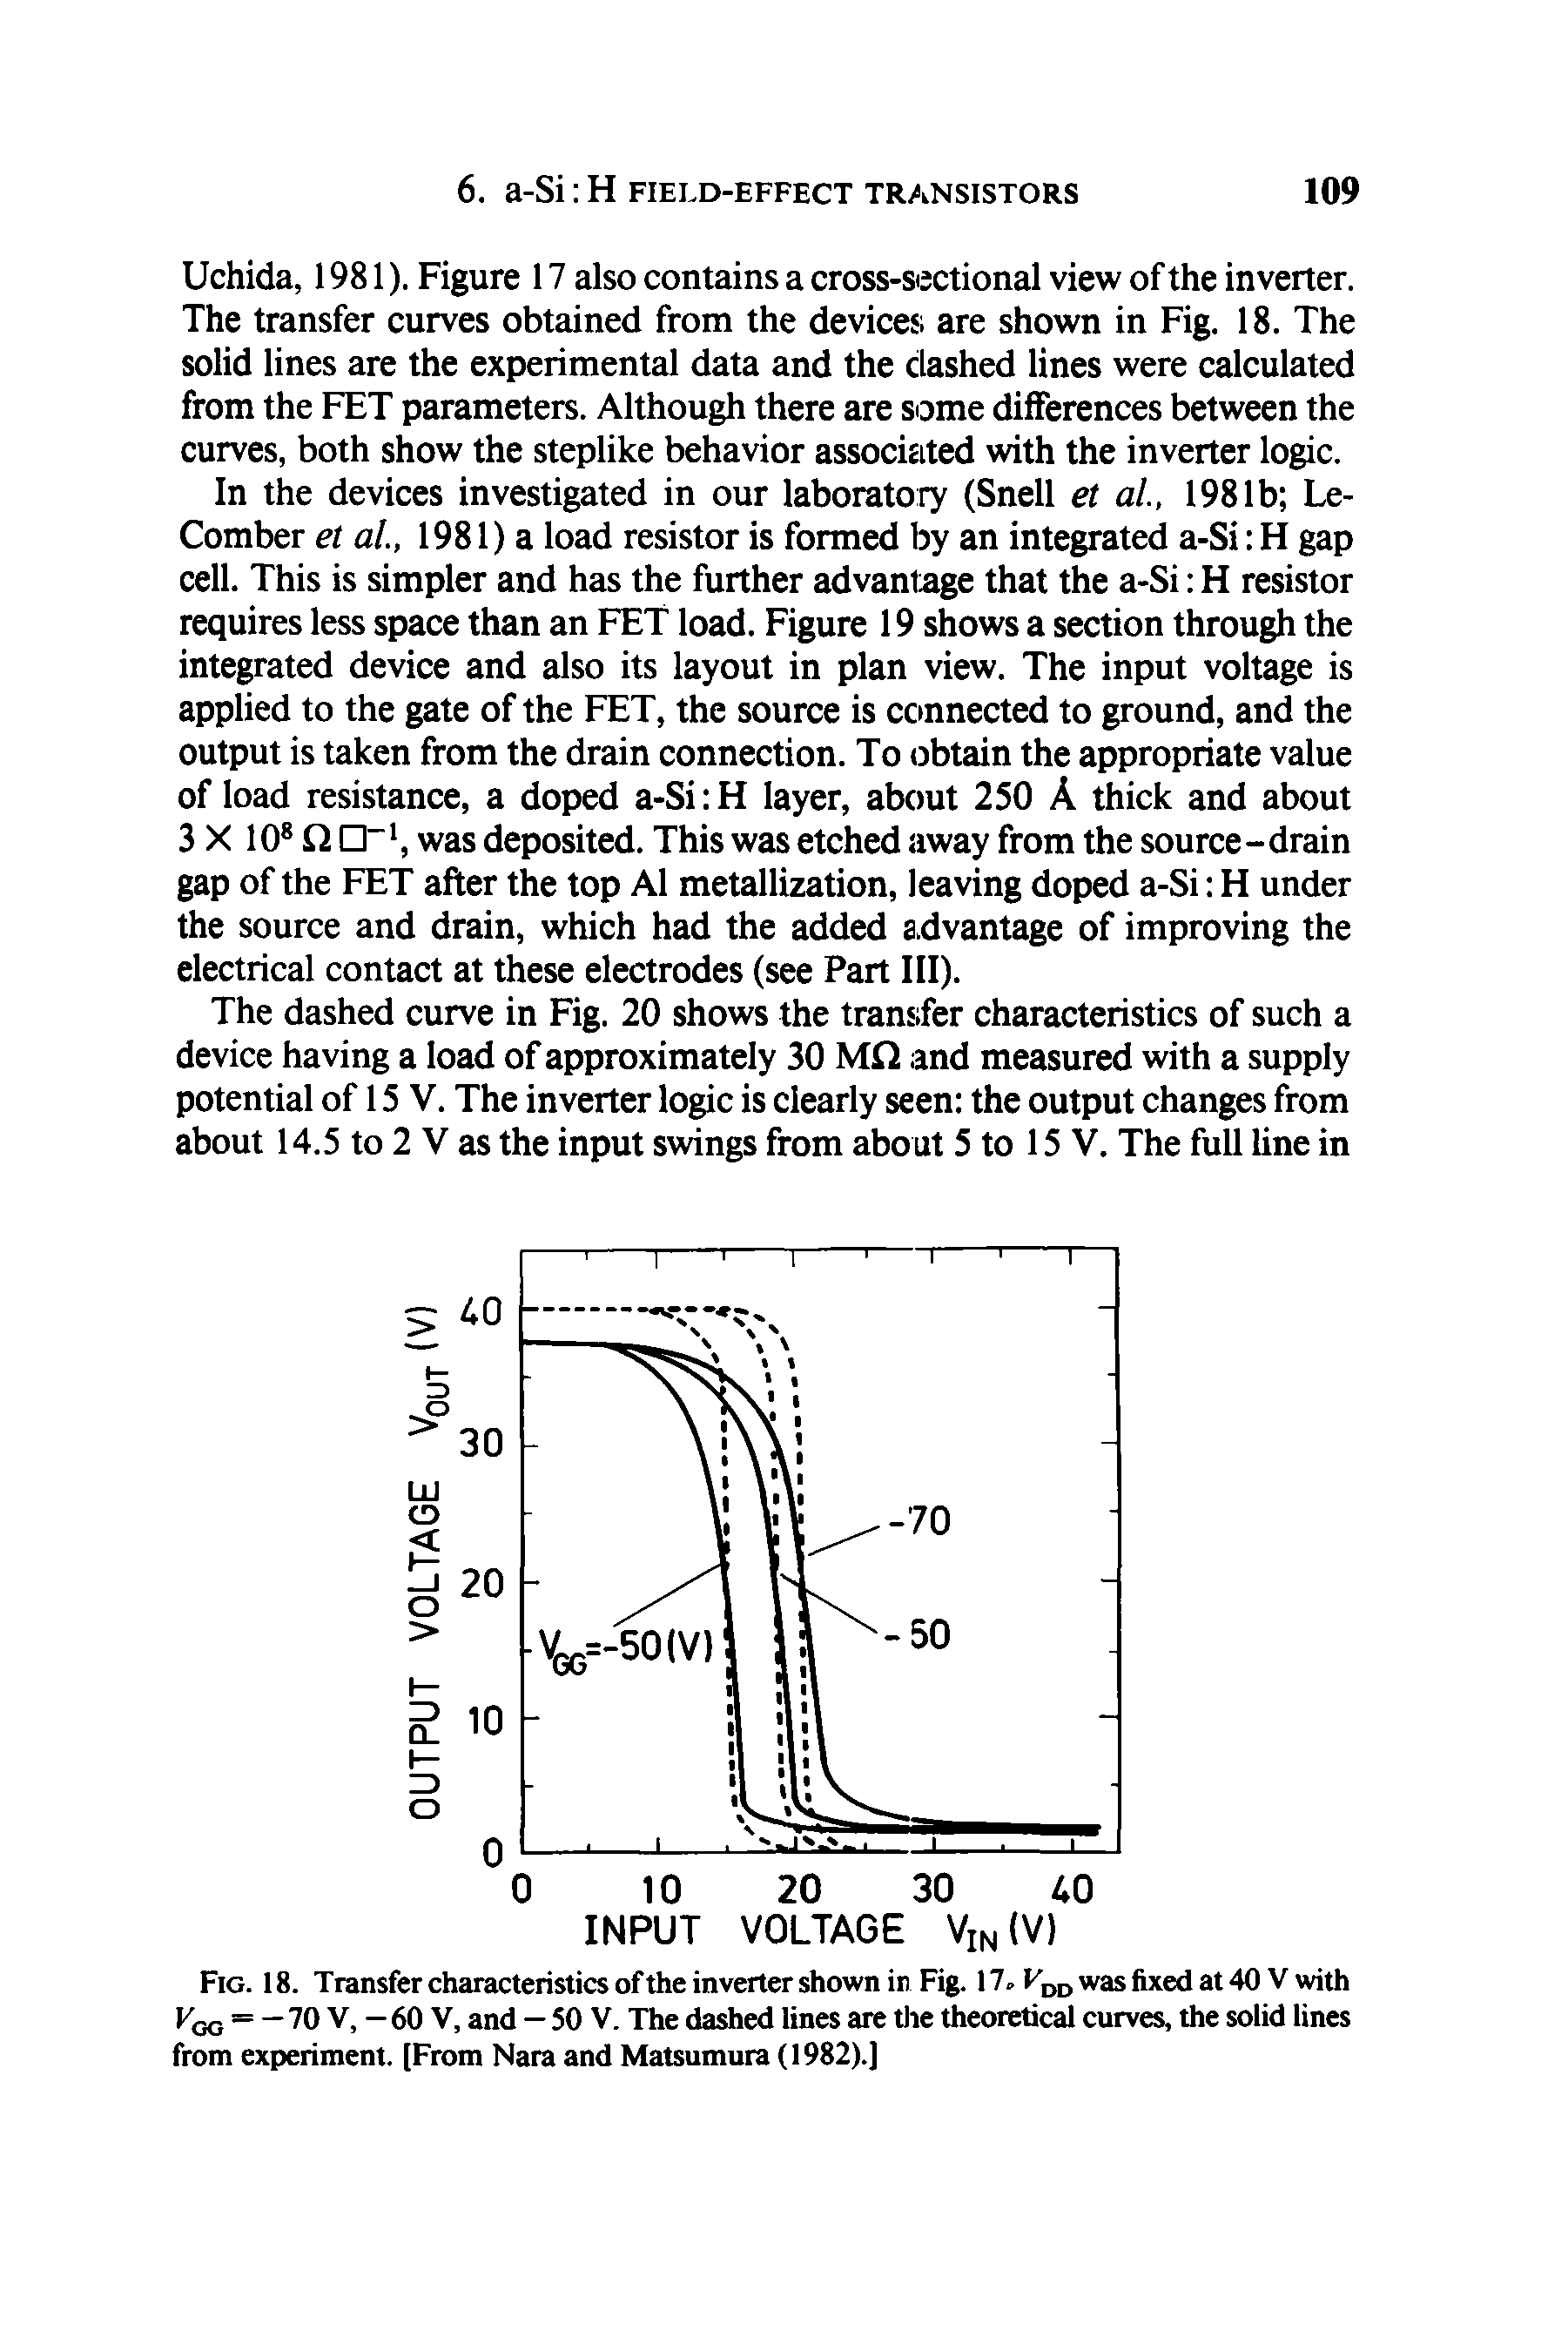 Fig. 18. Transfer characteristics ofthe inverter shown in Fig. 17 FDD was fixed at 40 V with Fgo = —70 V, — 60 V, and — 50 V. The dashed lines are Die theoretical curves, the solid lines from experiment. [From Nara and Matsumura (1982).]...